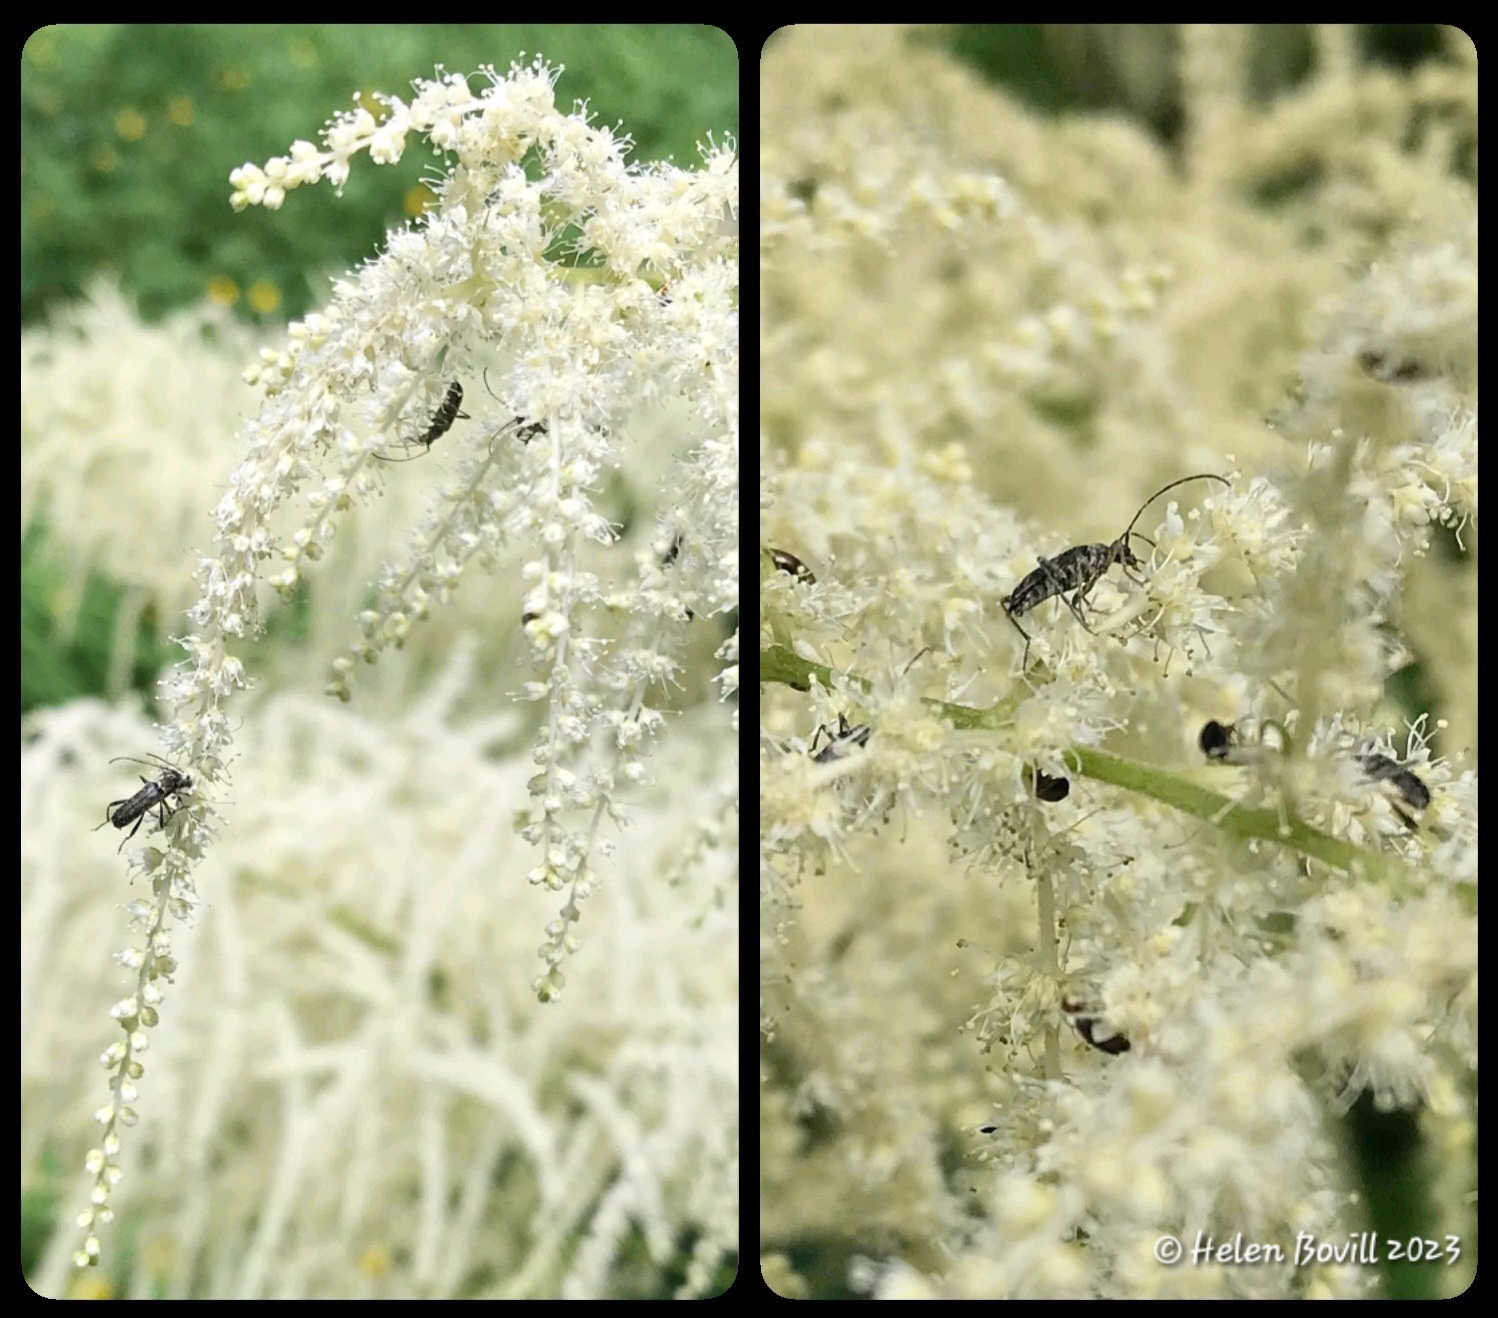 Astilbe with insects on its flowers